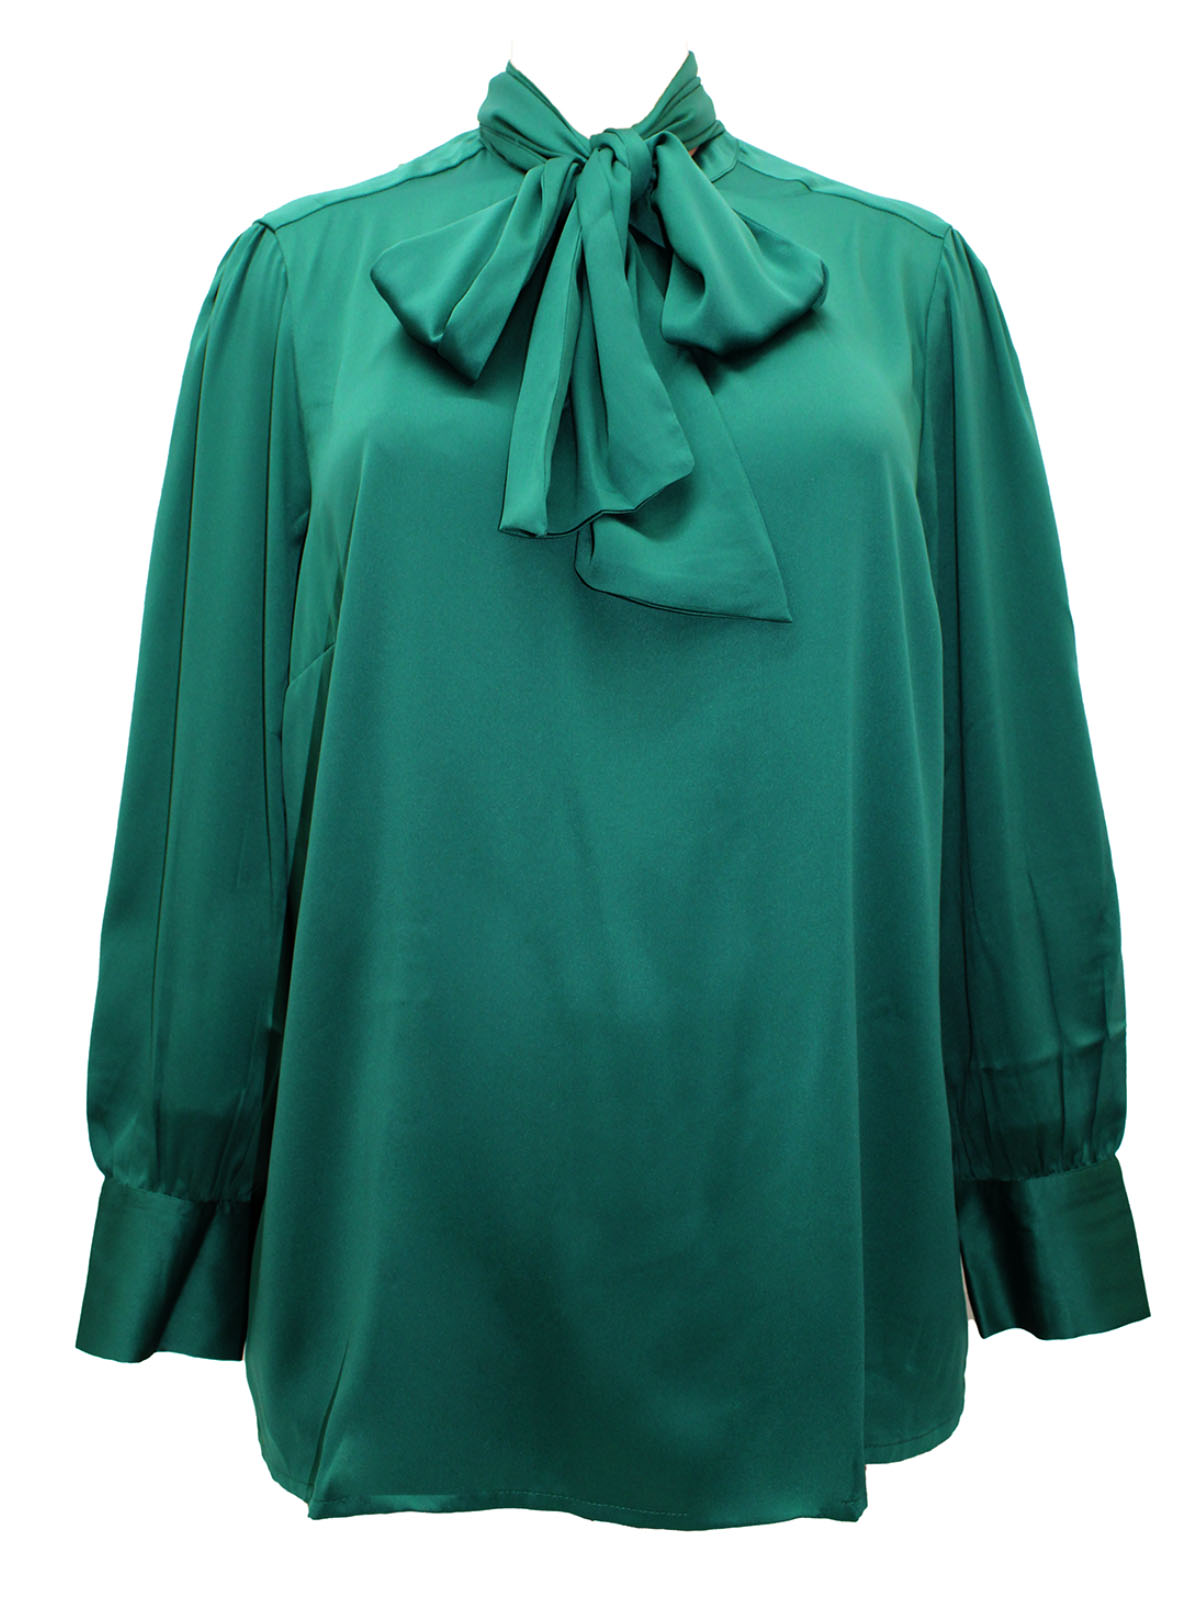 JD Williams - - JD Williams GREEN Removable Tie Satin Blouse - Plus ...